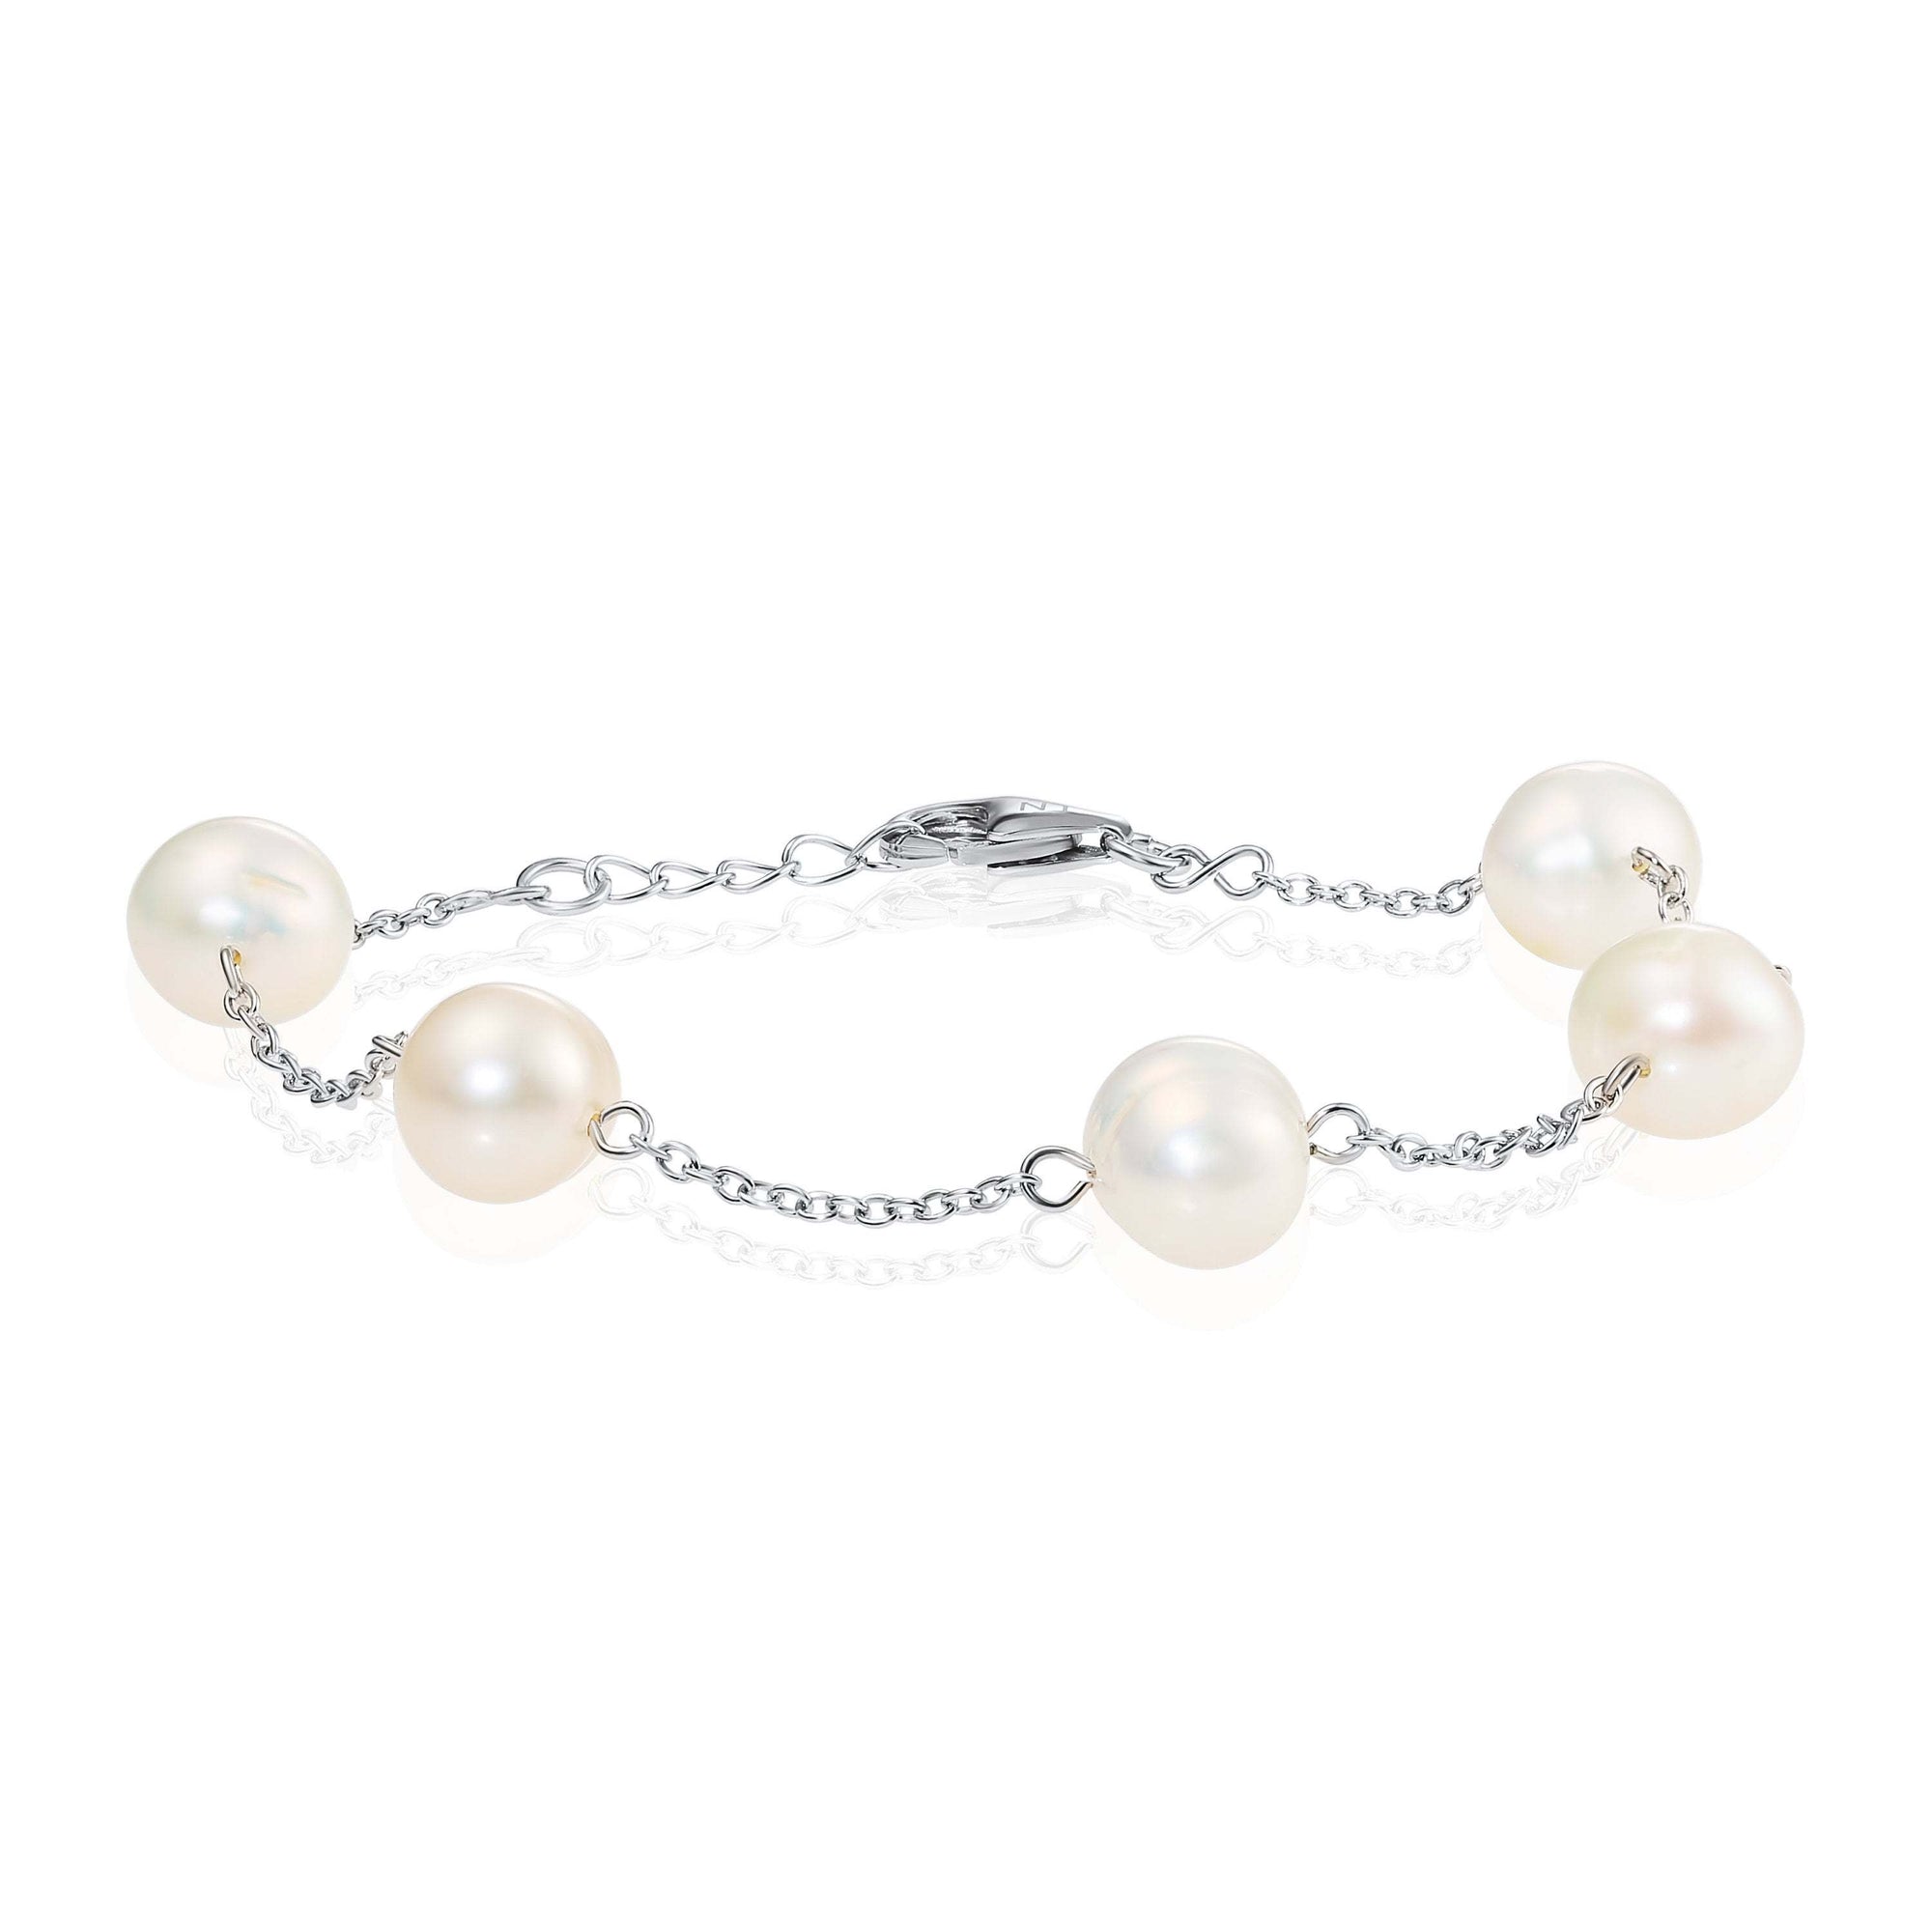 Pearl Bracelet in , White Freshwater Cultured Pearls, Adjustable Size in Sterling Silver